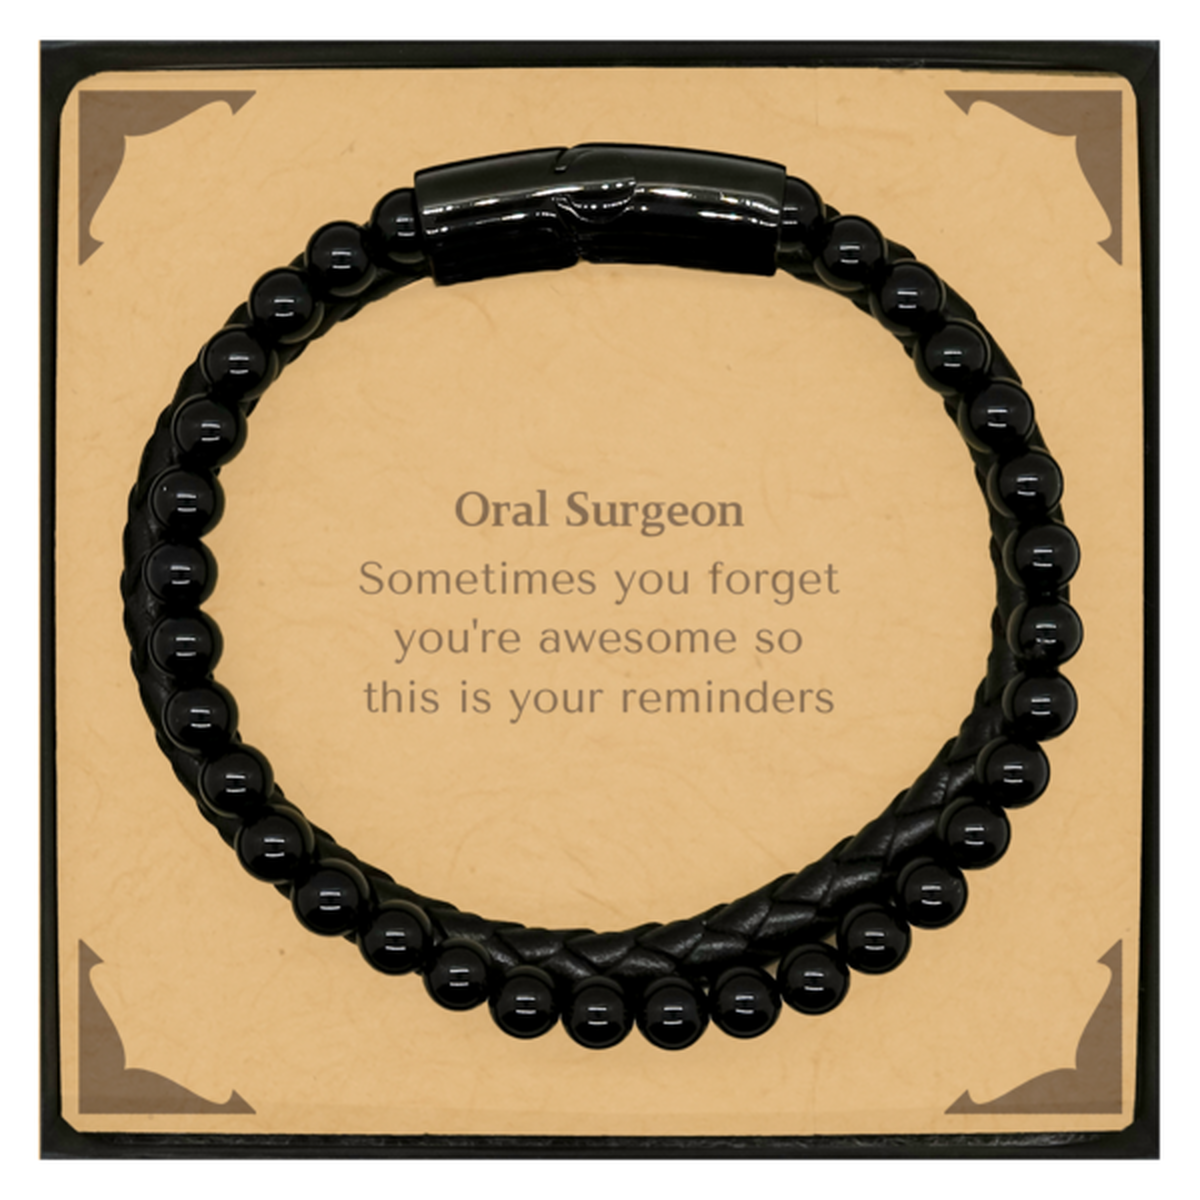 Sentimental Oral Surgeon Stone Leather Bracelets, Oral Surgeon Sometimes you forget you're awesome so this is your reminders, Graduation Christmas Birthday Gifts for Oral Surgeon, Men, Women, Coworkers